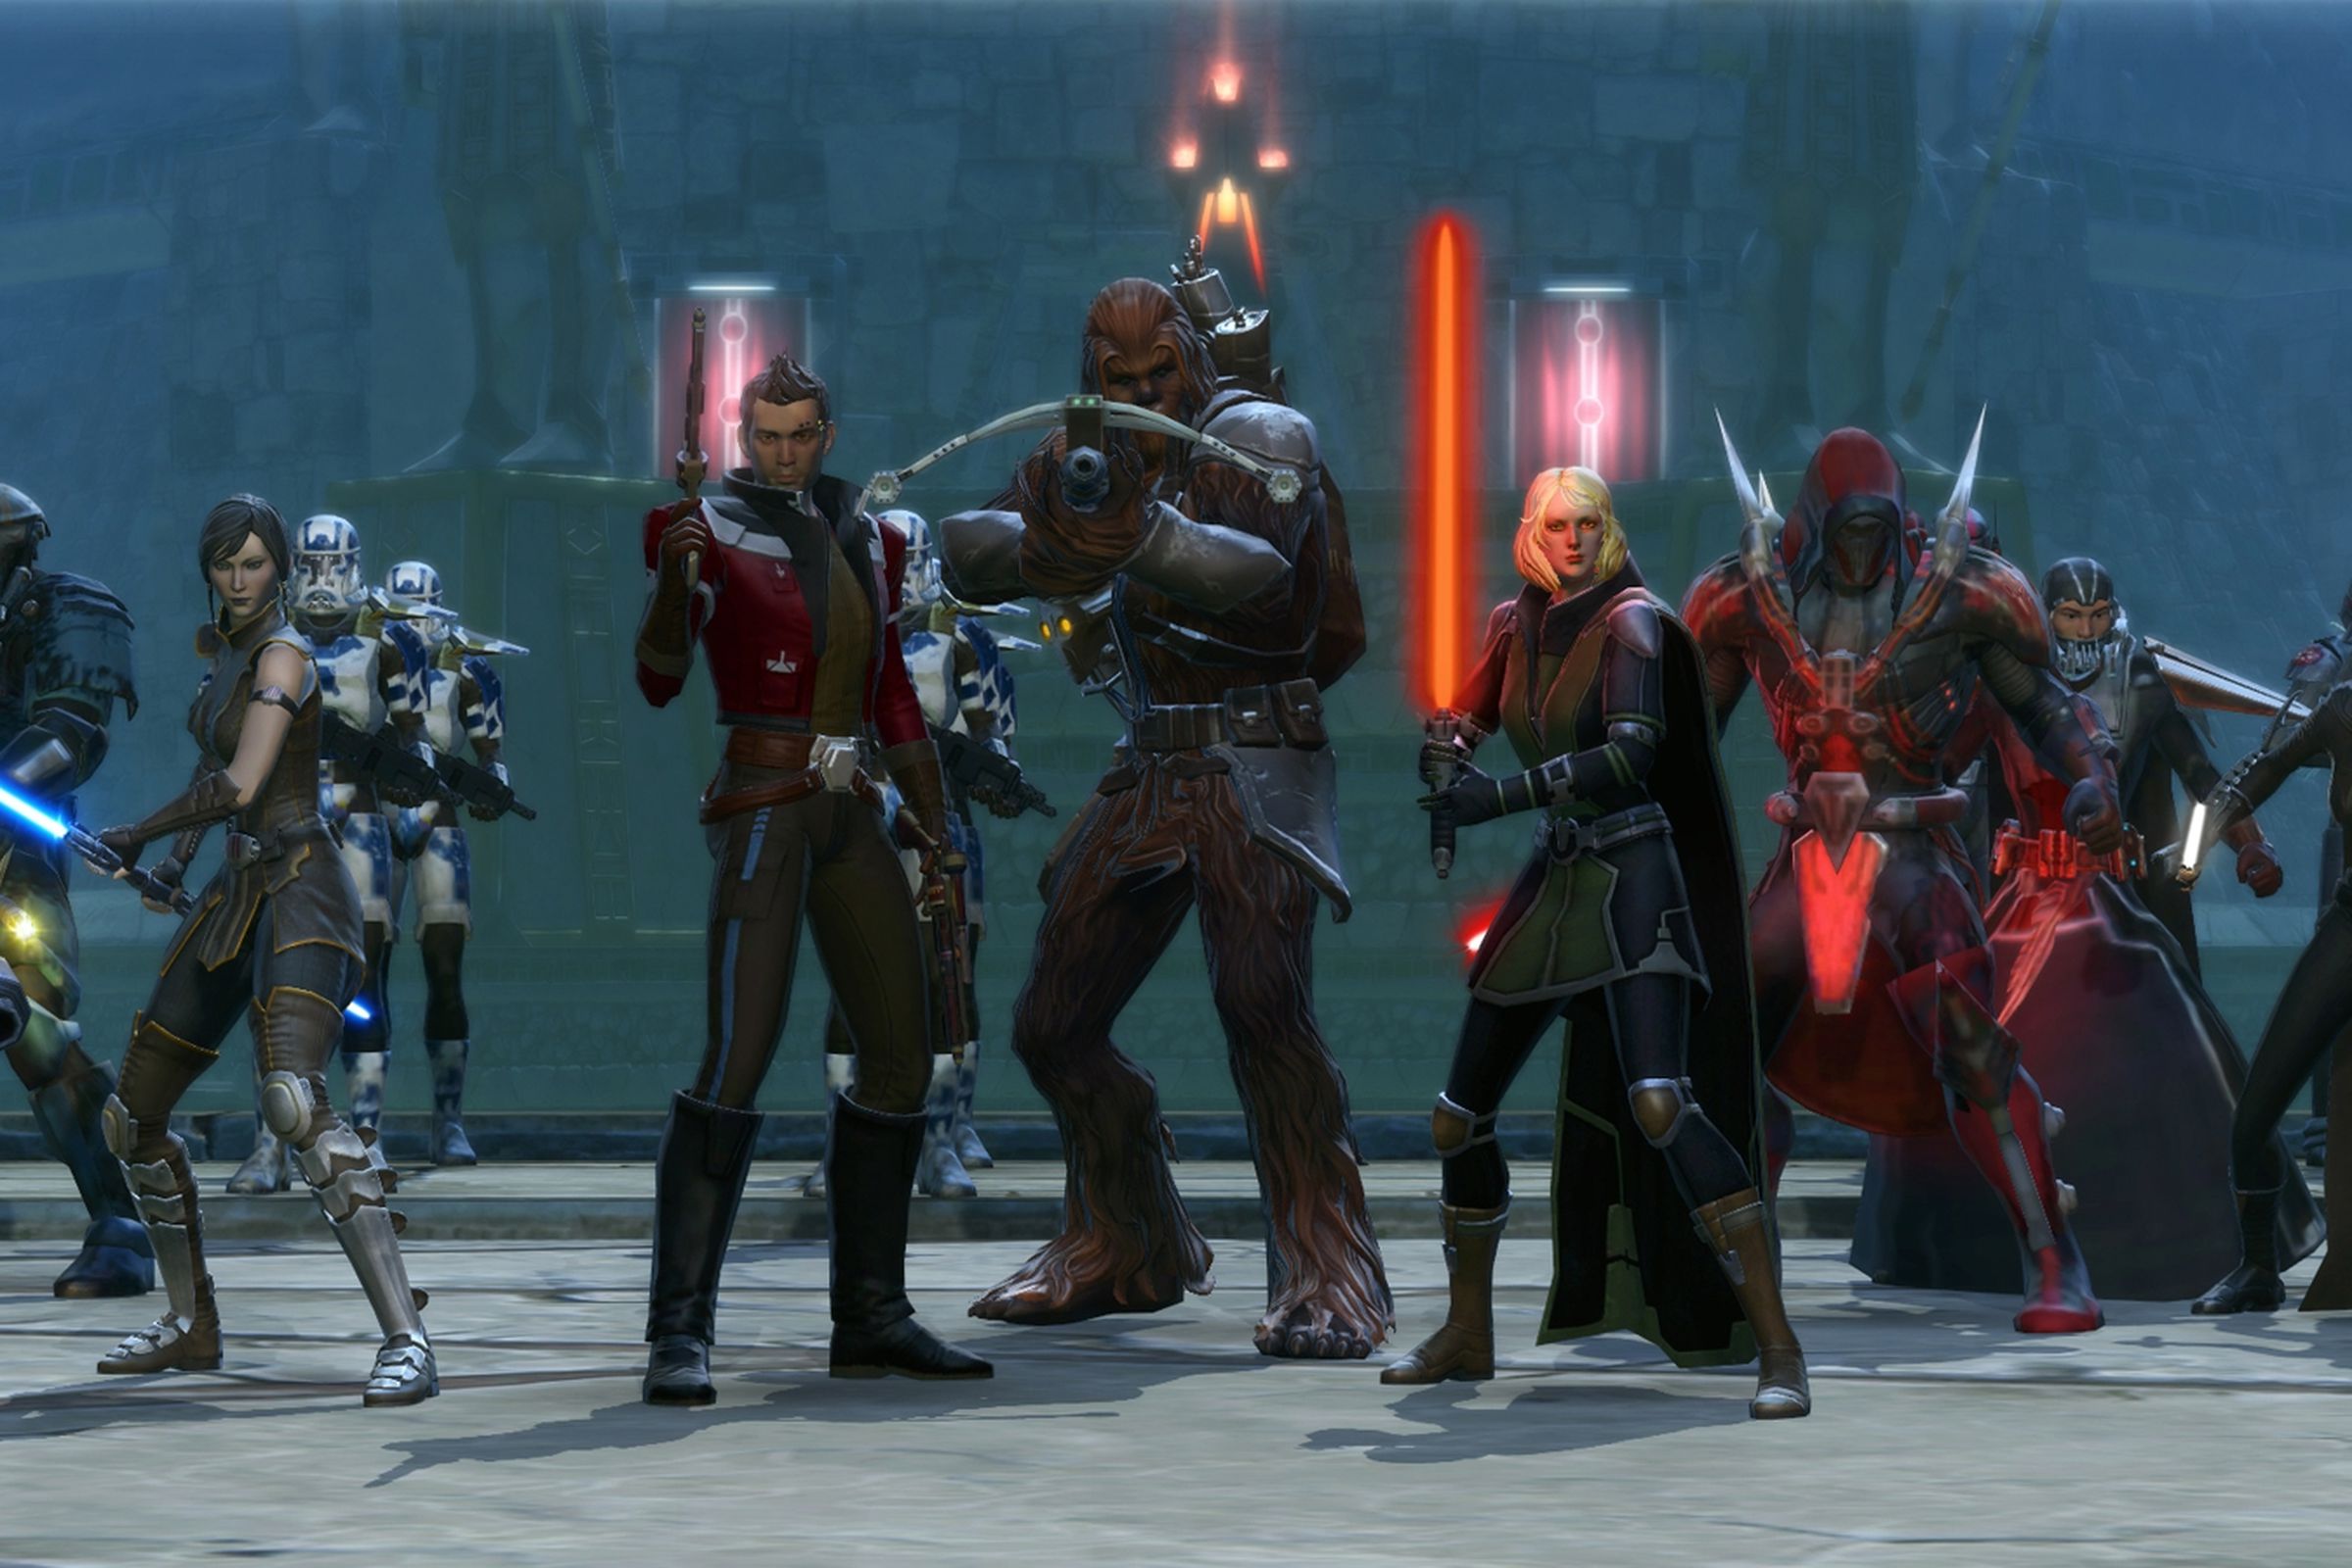 Screenshot from Star Wars: The Old Republic featuring a gathering of Star Wars themed characters